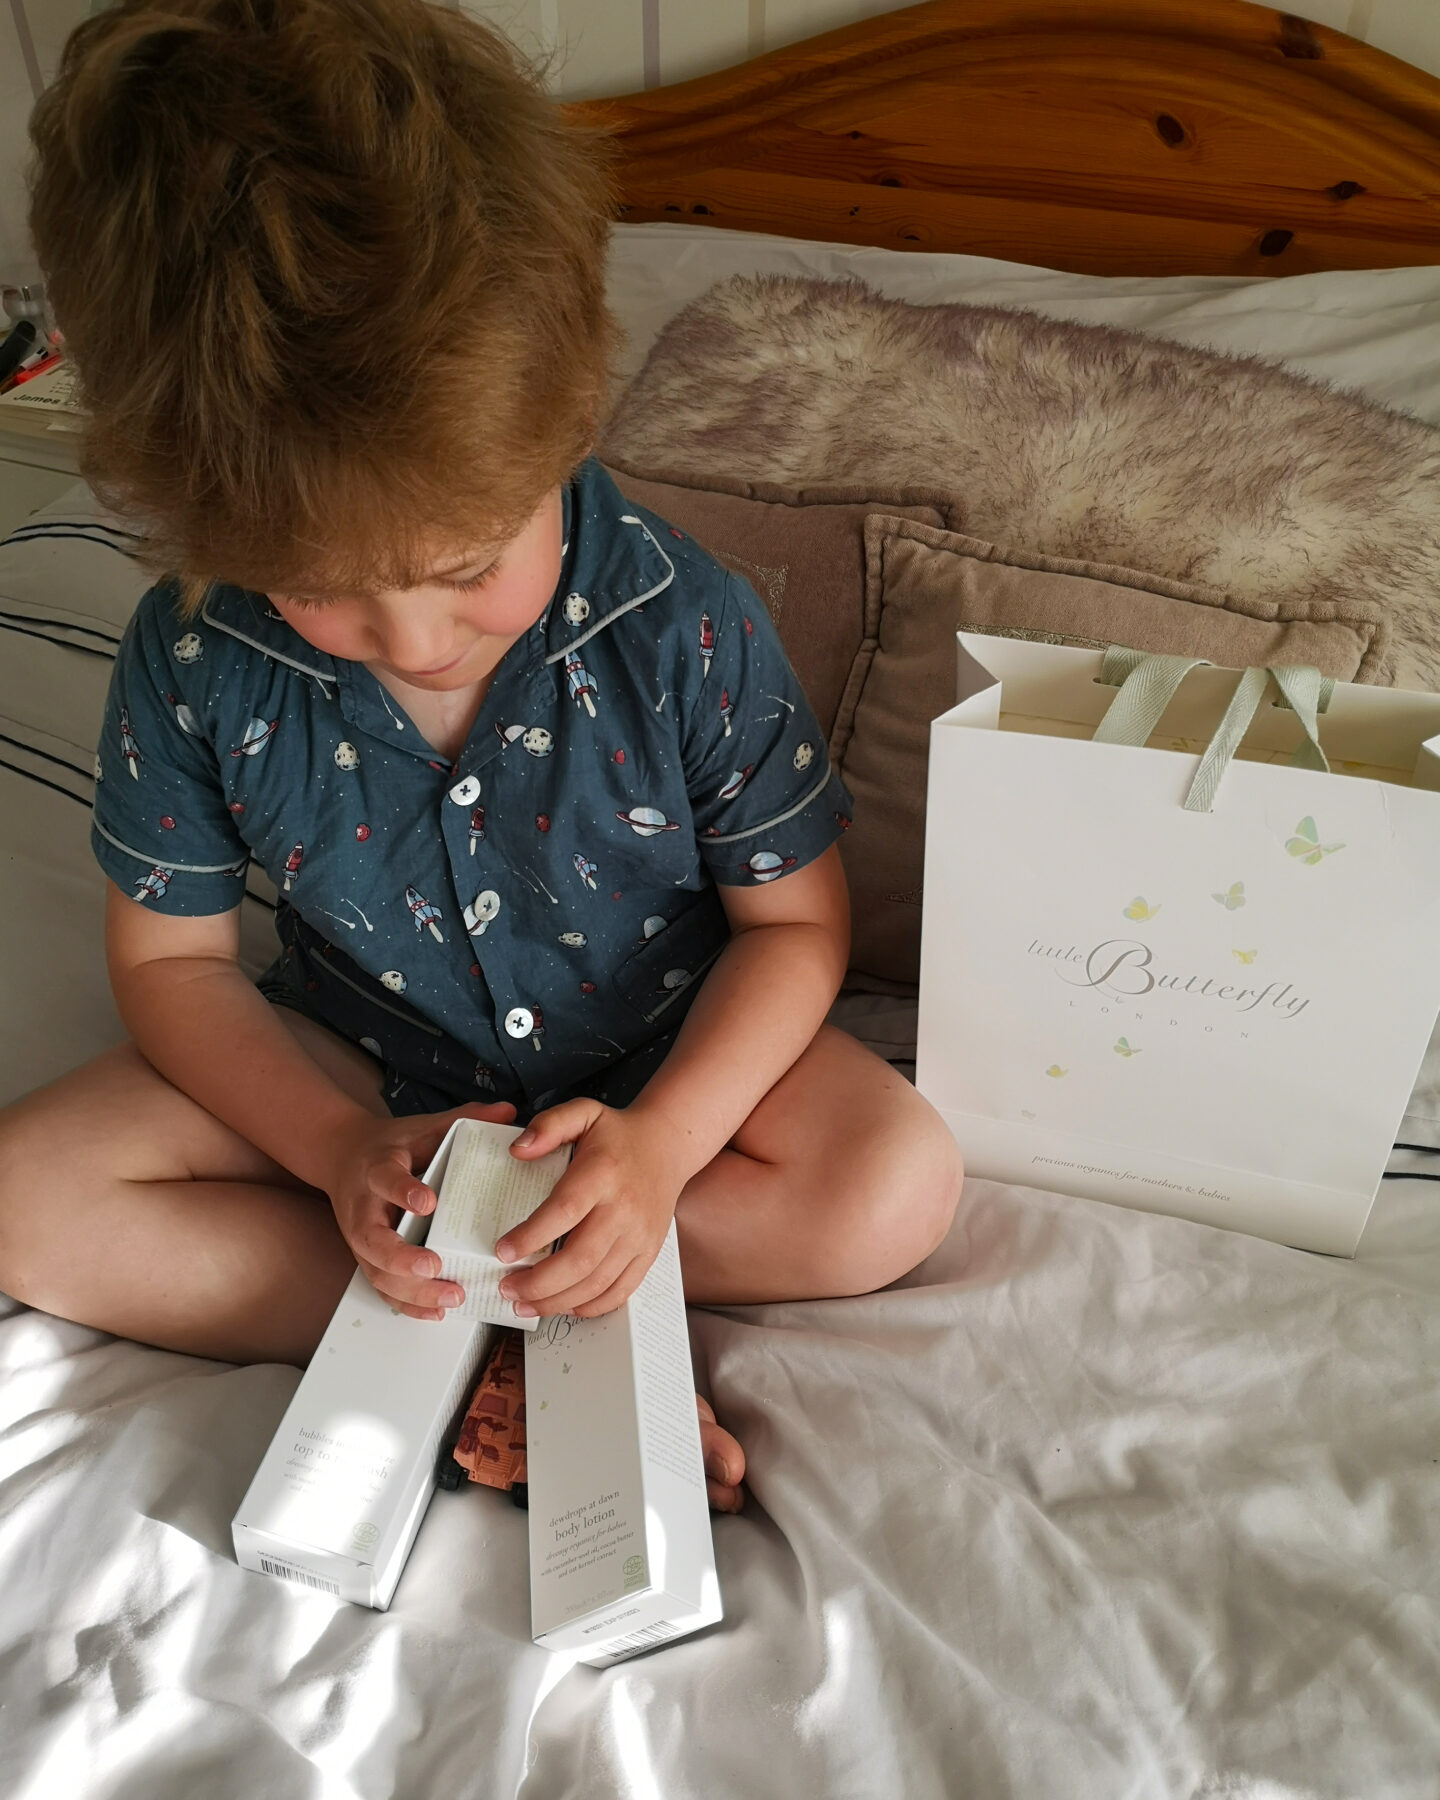 Little Butterfly Bestseller Kit, Little Butterfly London, Children's Skincare, Organic Skincare Brand, Eczema Prone, The Frenchie Mummy, Natural Ingredients, Blog Anniversary Giveaway, Competition, Win, Organic Skincare, Baby Pamper set